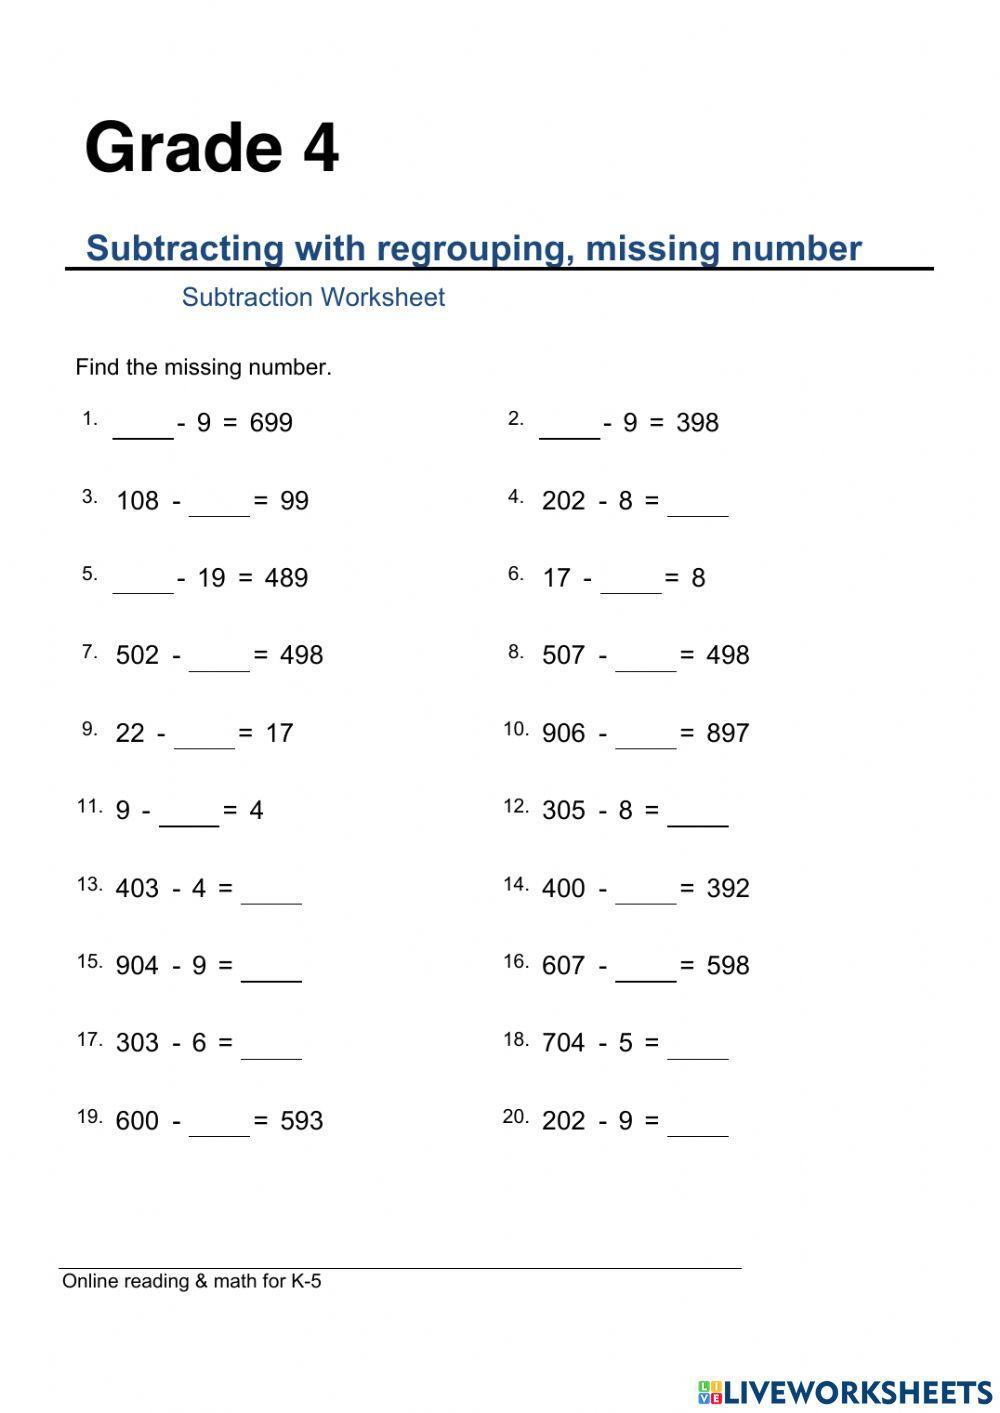 Subtraction without Regrouping